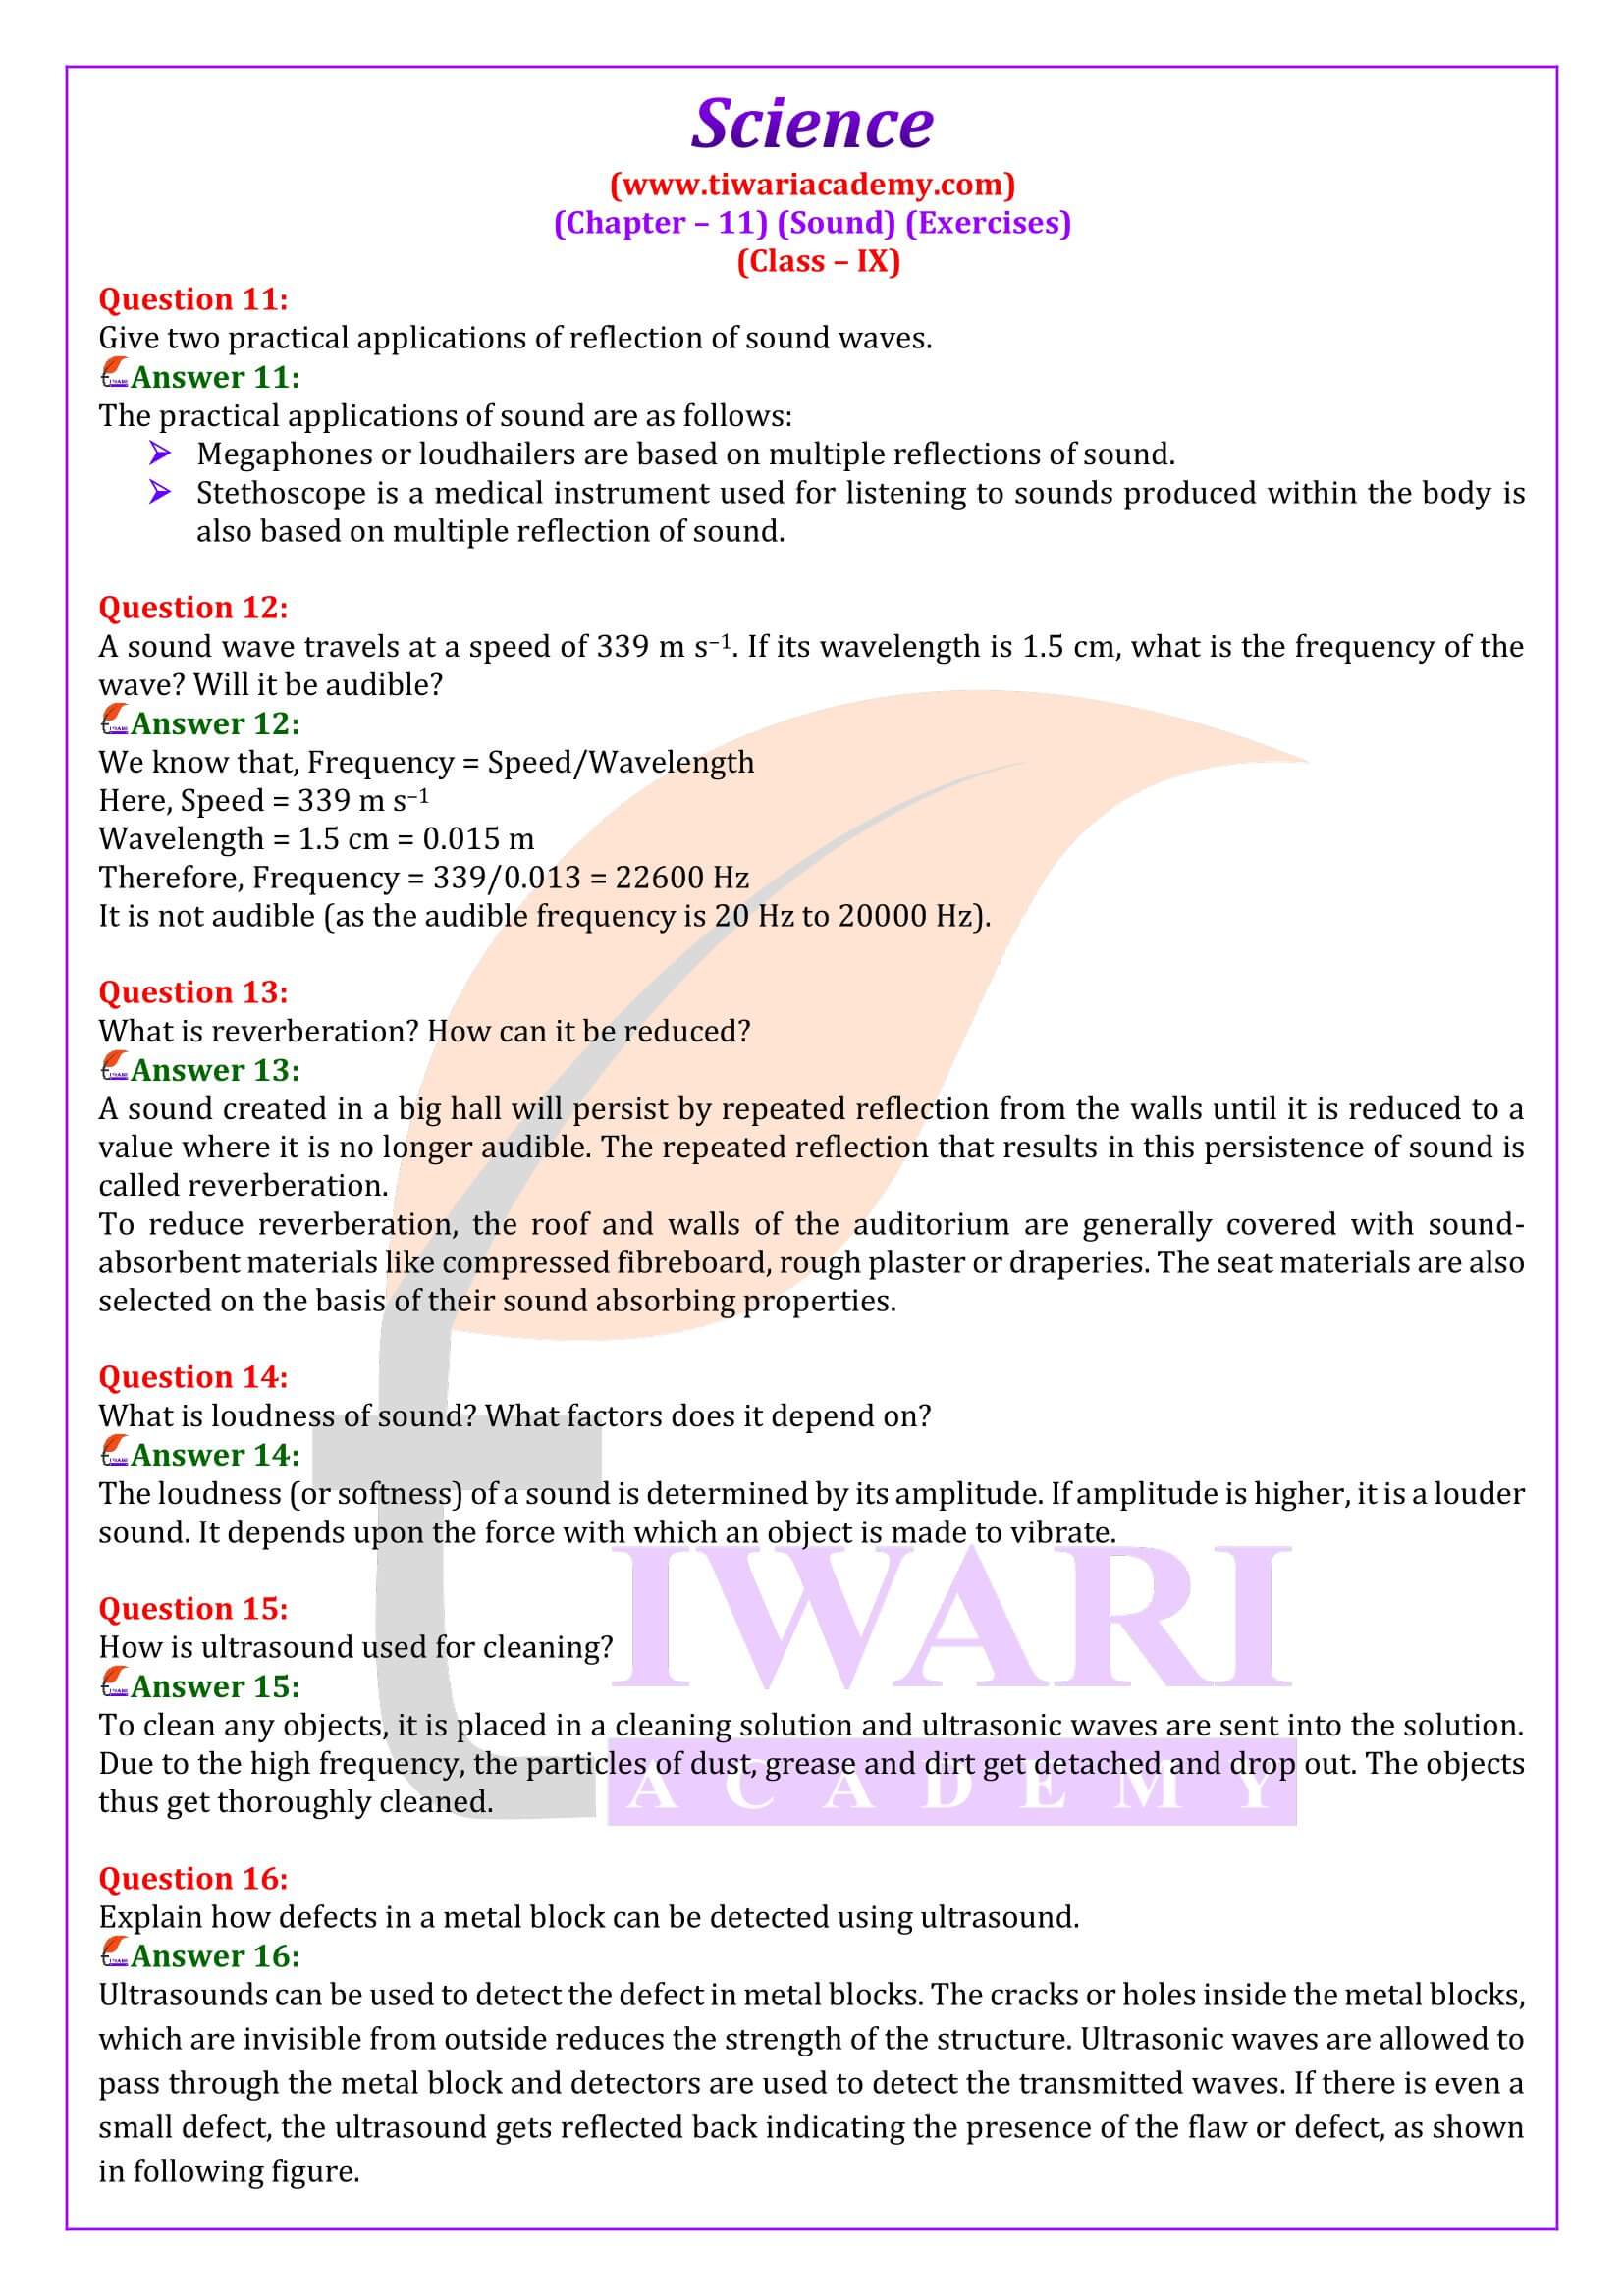 NCERT Solutions for Class 9 Science Chapter 11 in English Medium